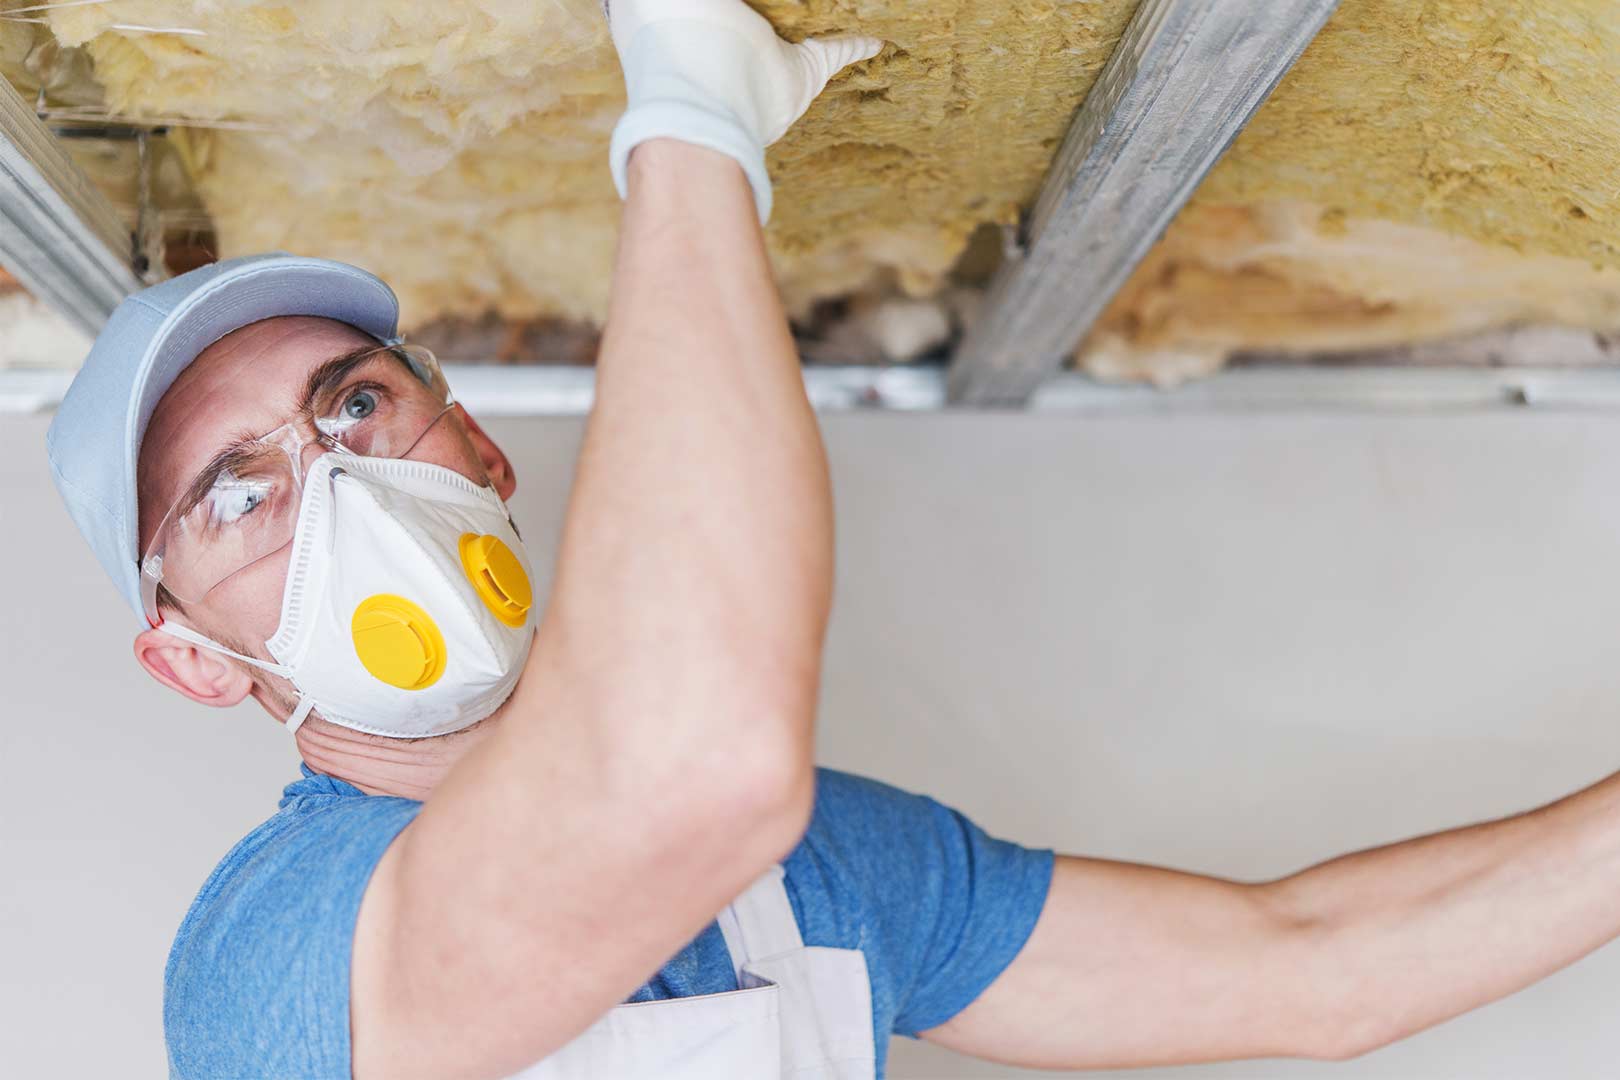 After draining and cleaning, it's time for crawlspace encapsulation. Affordable Waterproofing and Foundation Repair use the latest and safest foam insulation to make your crawlspace free from damp.